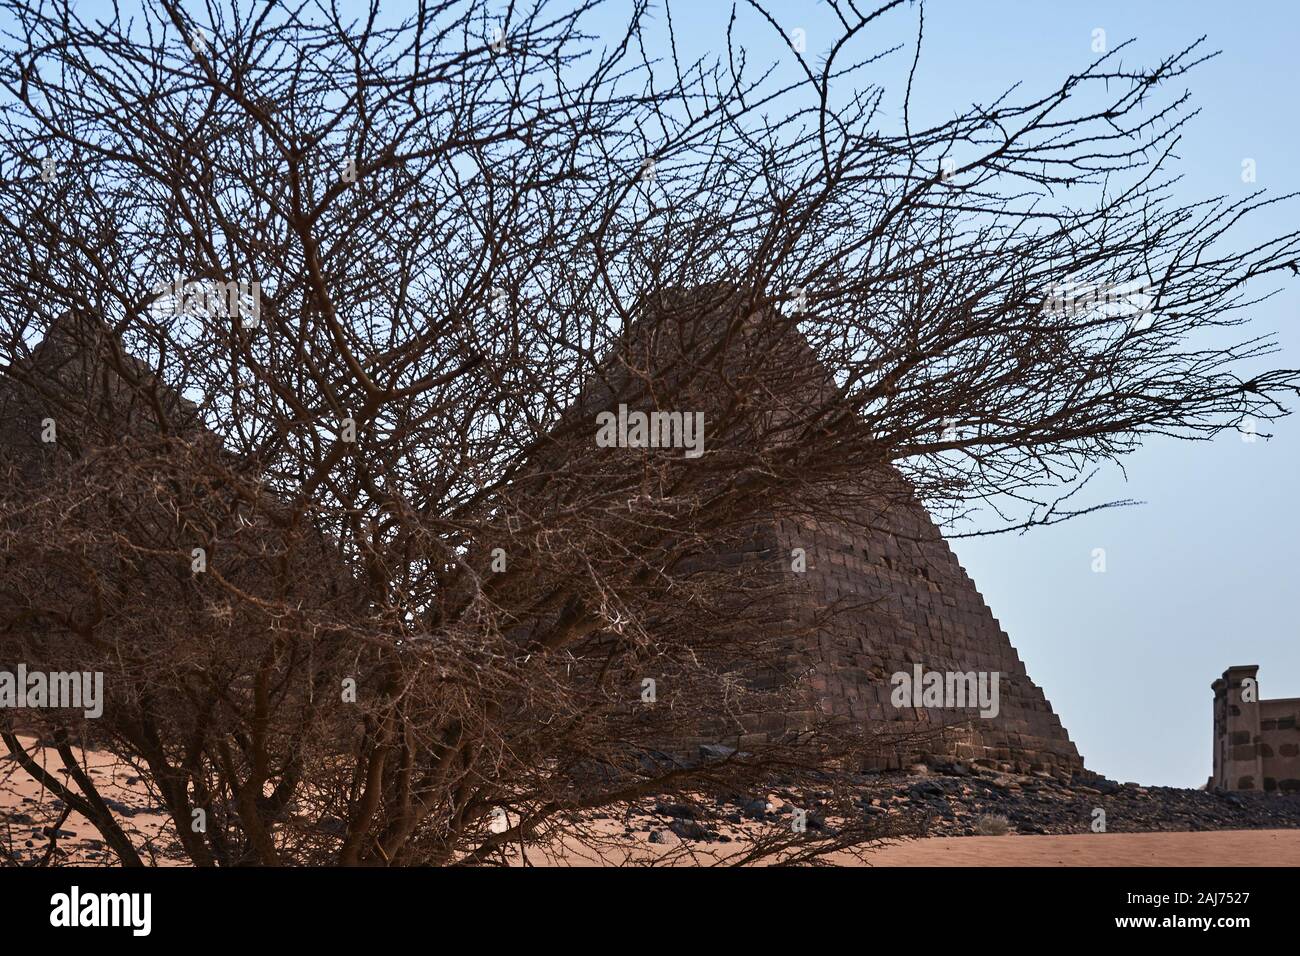 Acacia bush without leaves in front of the pyramids of Meroe in Sudan Stock Photo